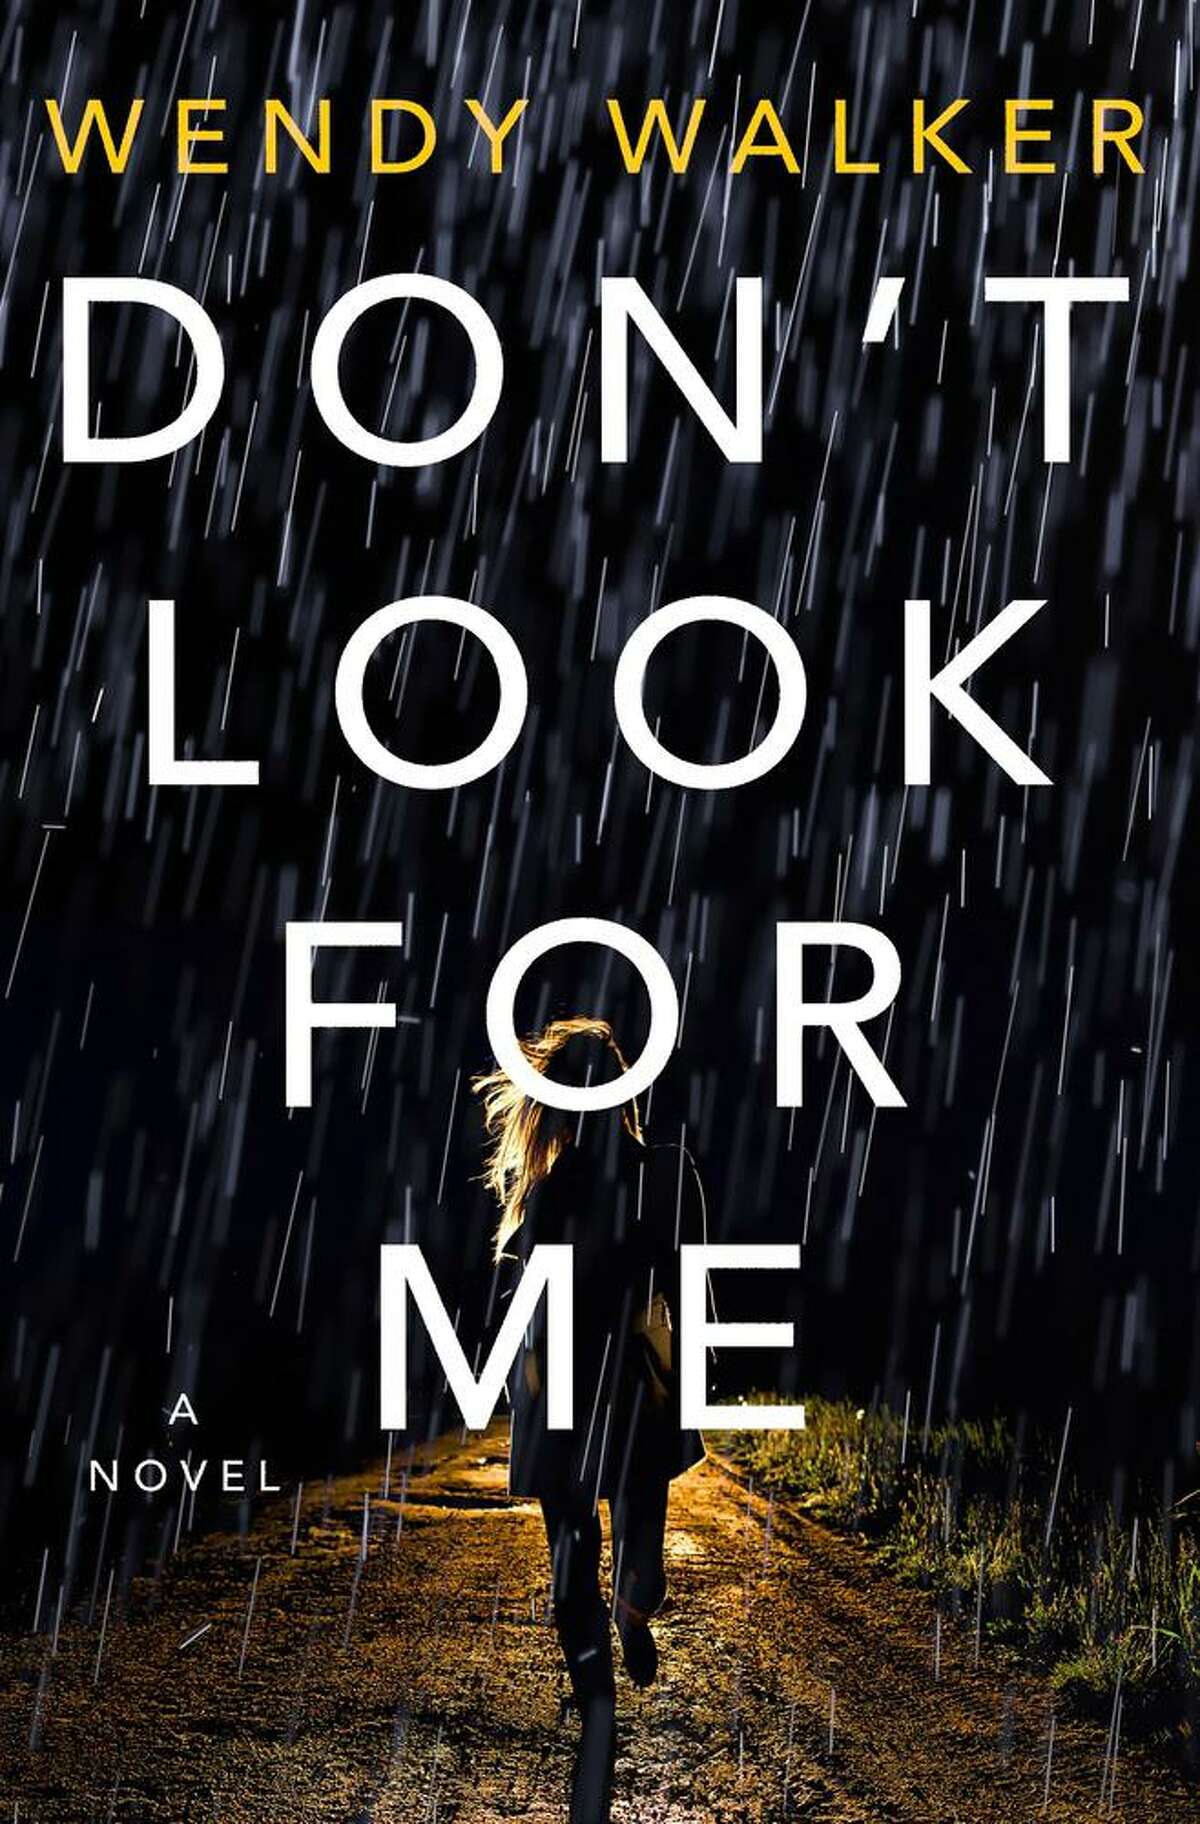 Wendy Walker’s new thriller “Don’t Look for Me” is more than a couple of red herrings and clues.